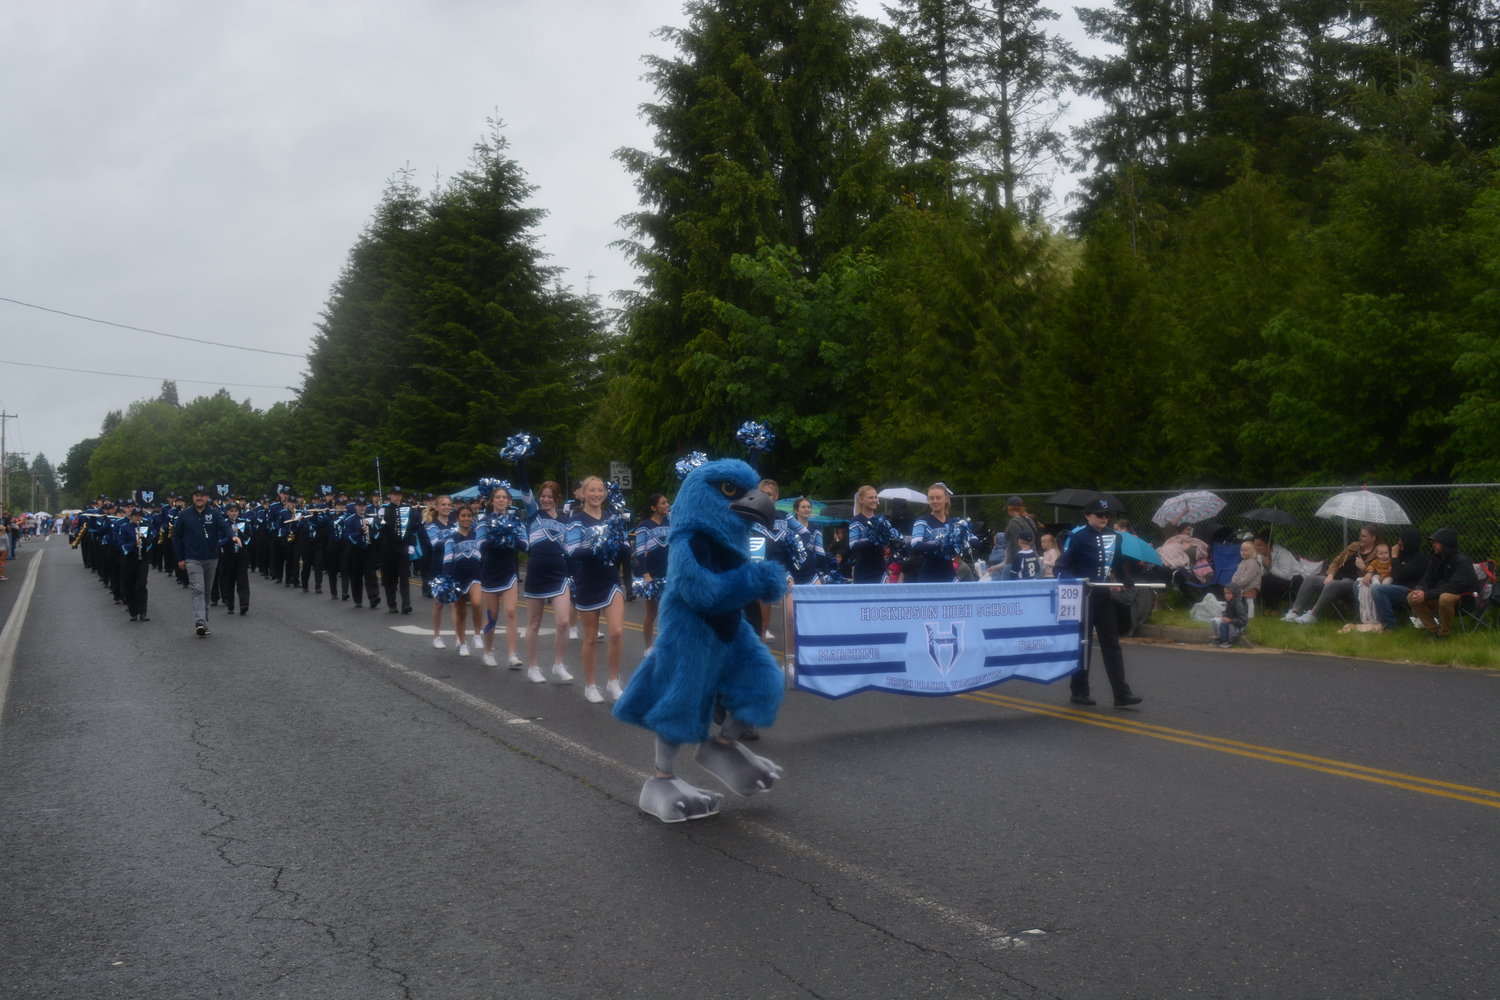 The Hockinson High School band kicks off the Fun Days parade, guided by the school’s hawk mascot on June 4.